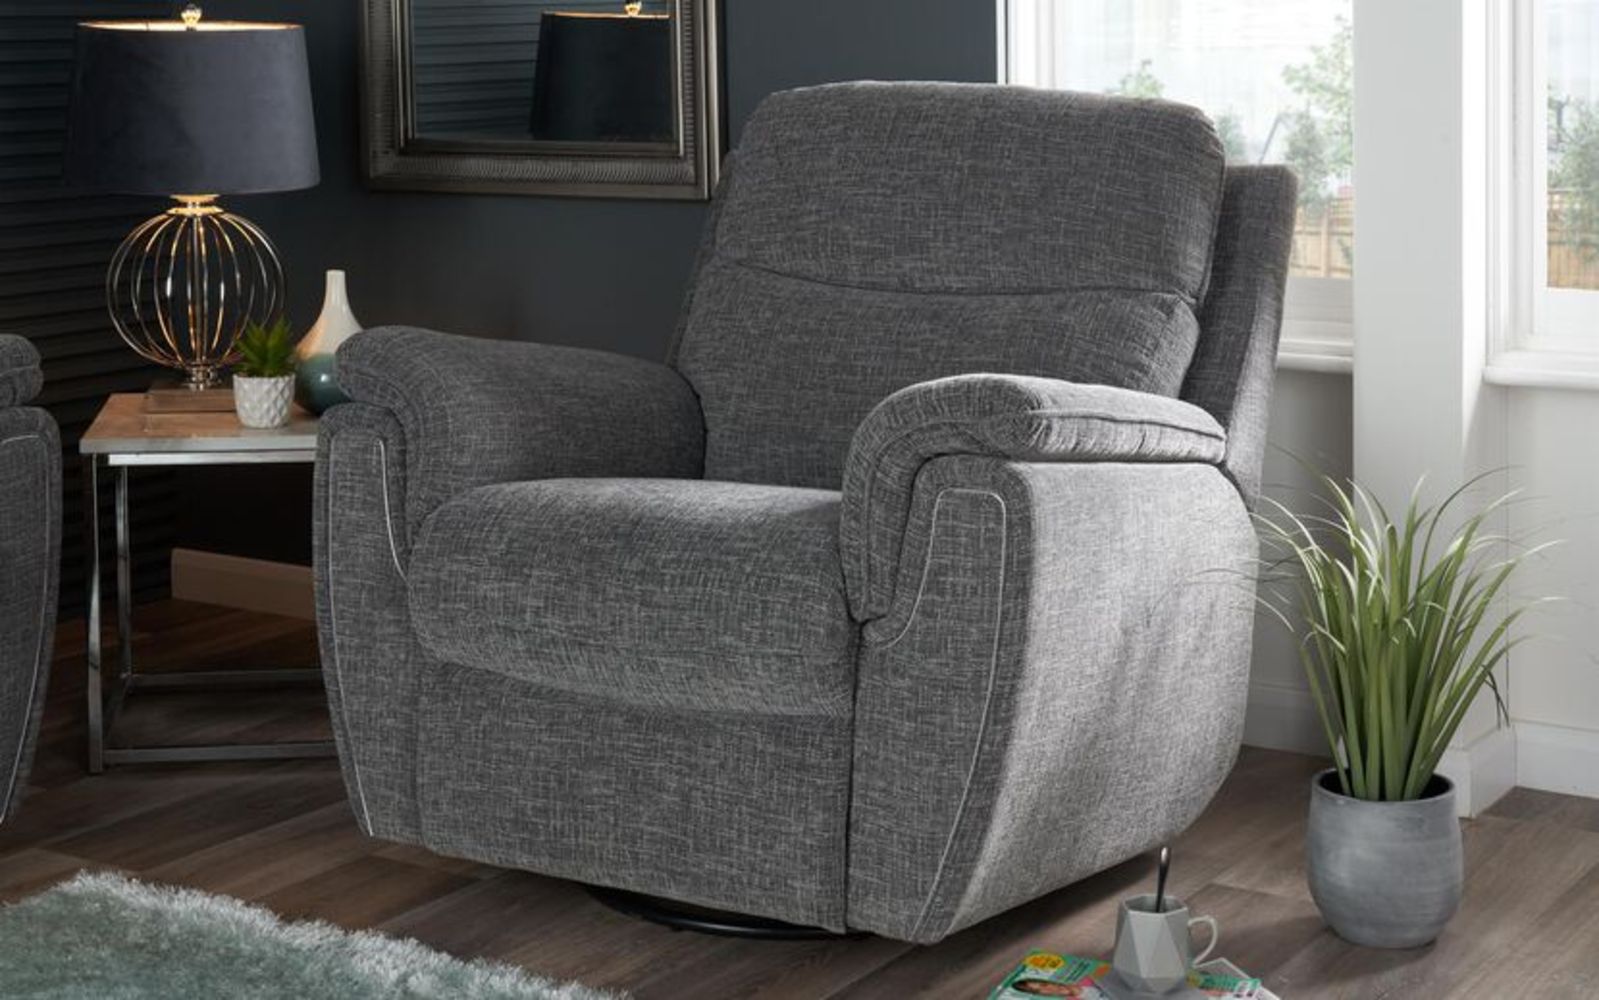 sofas, Chair and footstools from major high street retailers